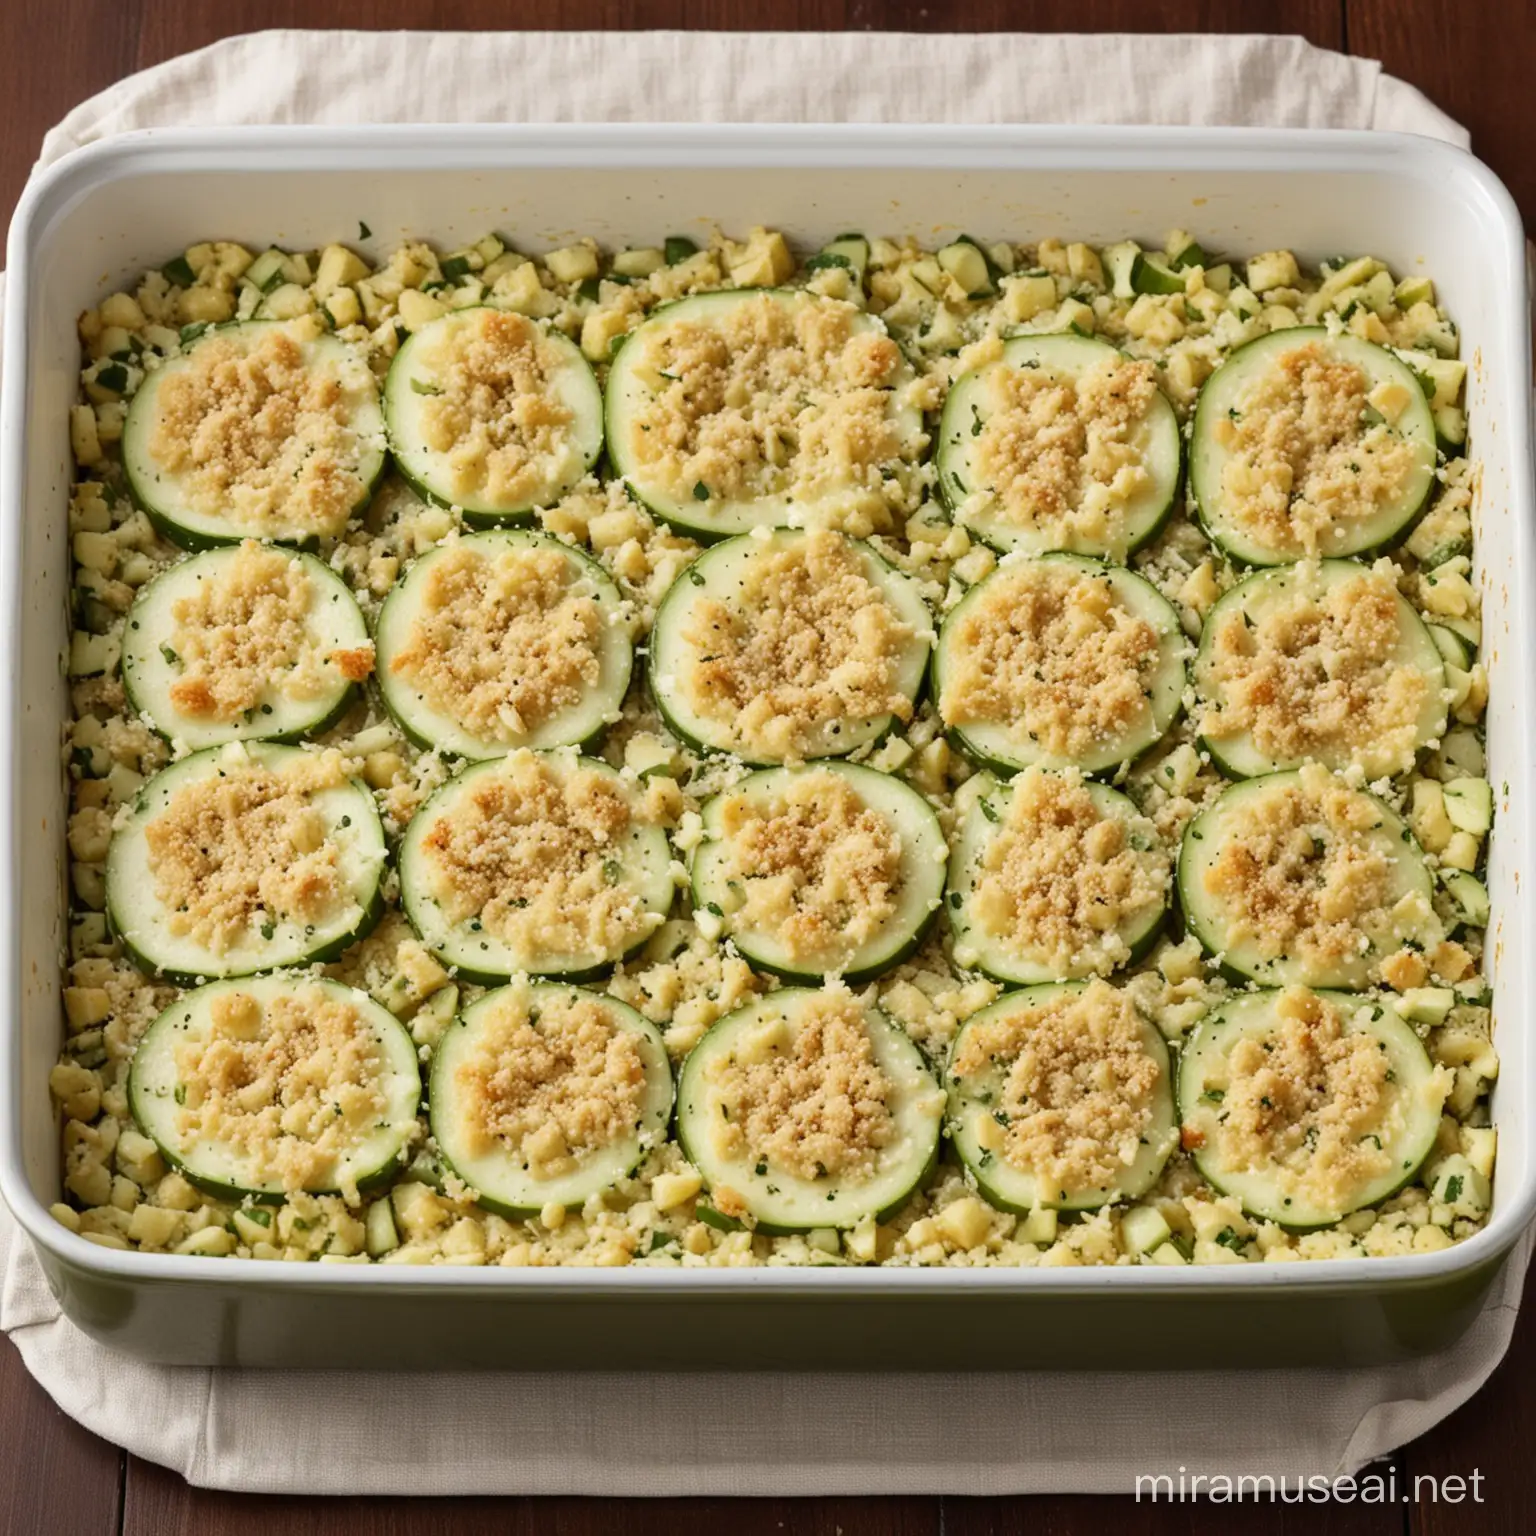 Savory Baked Zucchini Casserole Recipe A Delectable Blend of Fresh Ingredients and Golden Crust